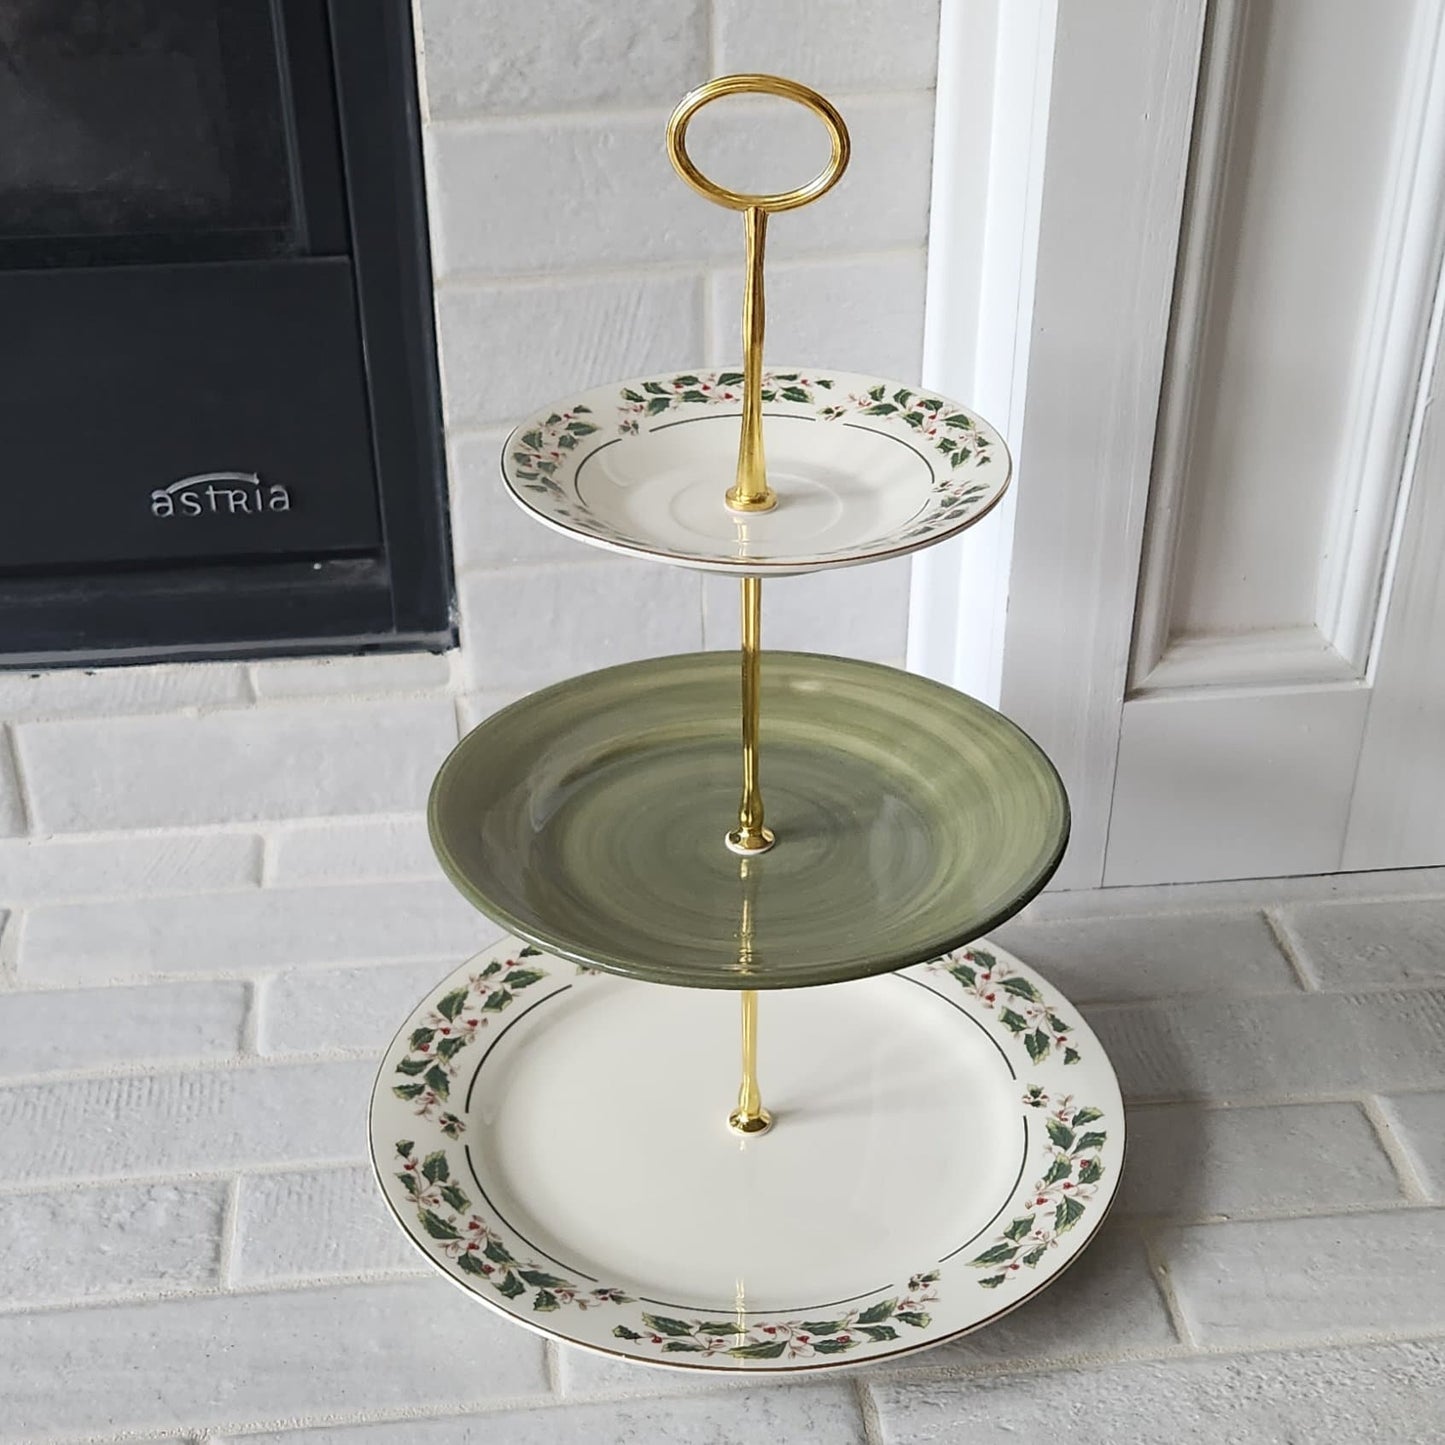 3 Tier Cake Stand Holly Pattern